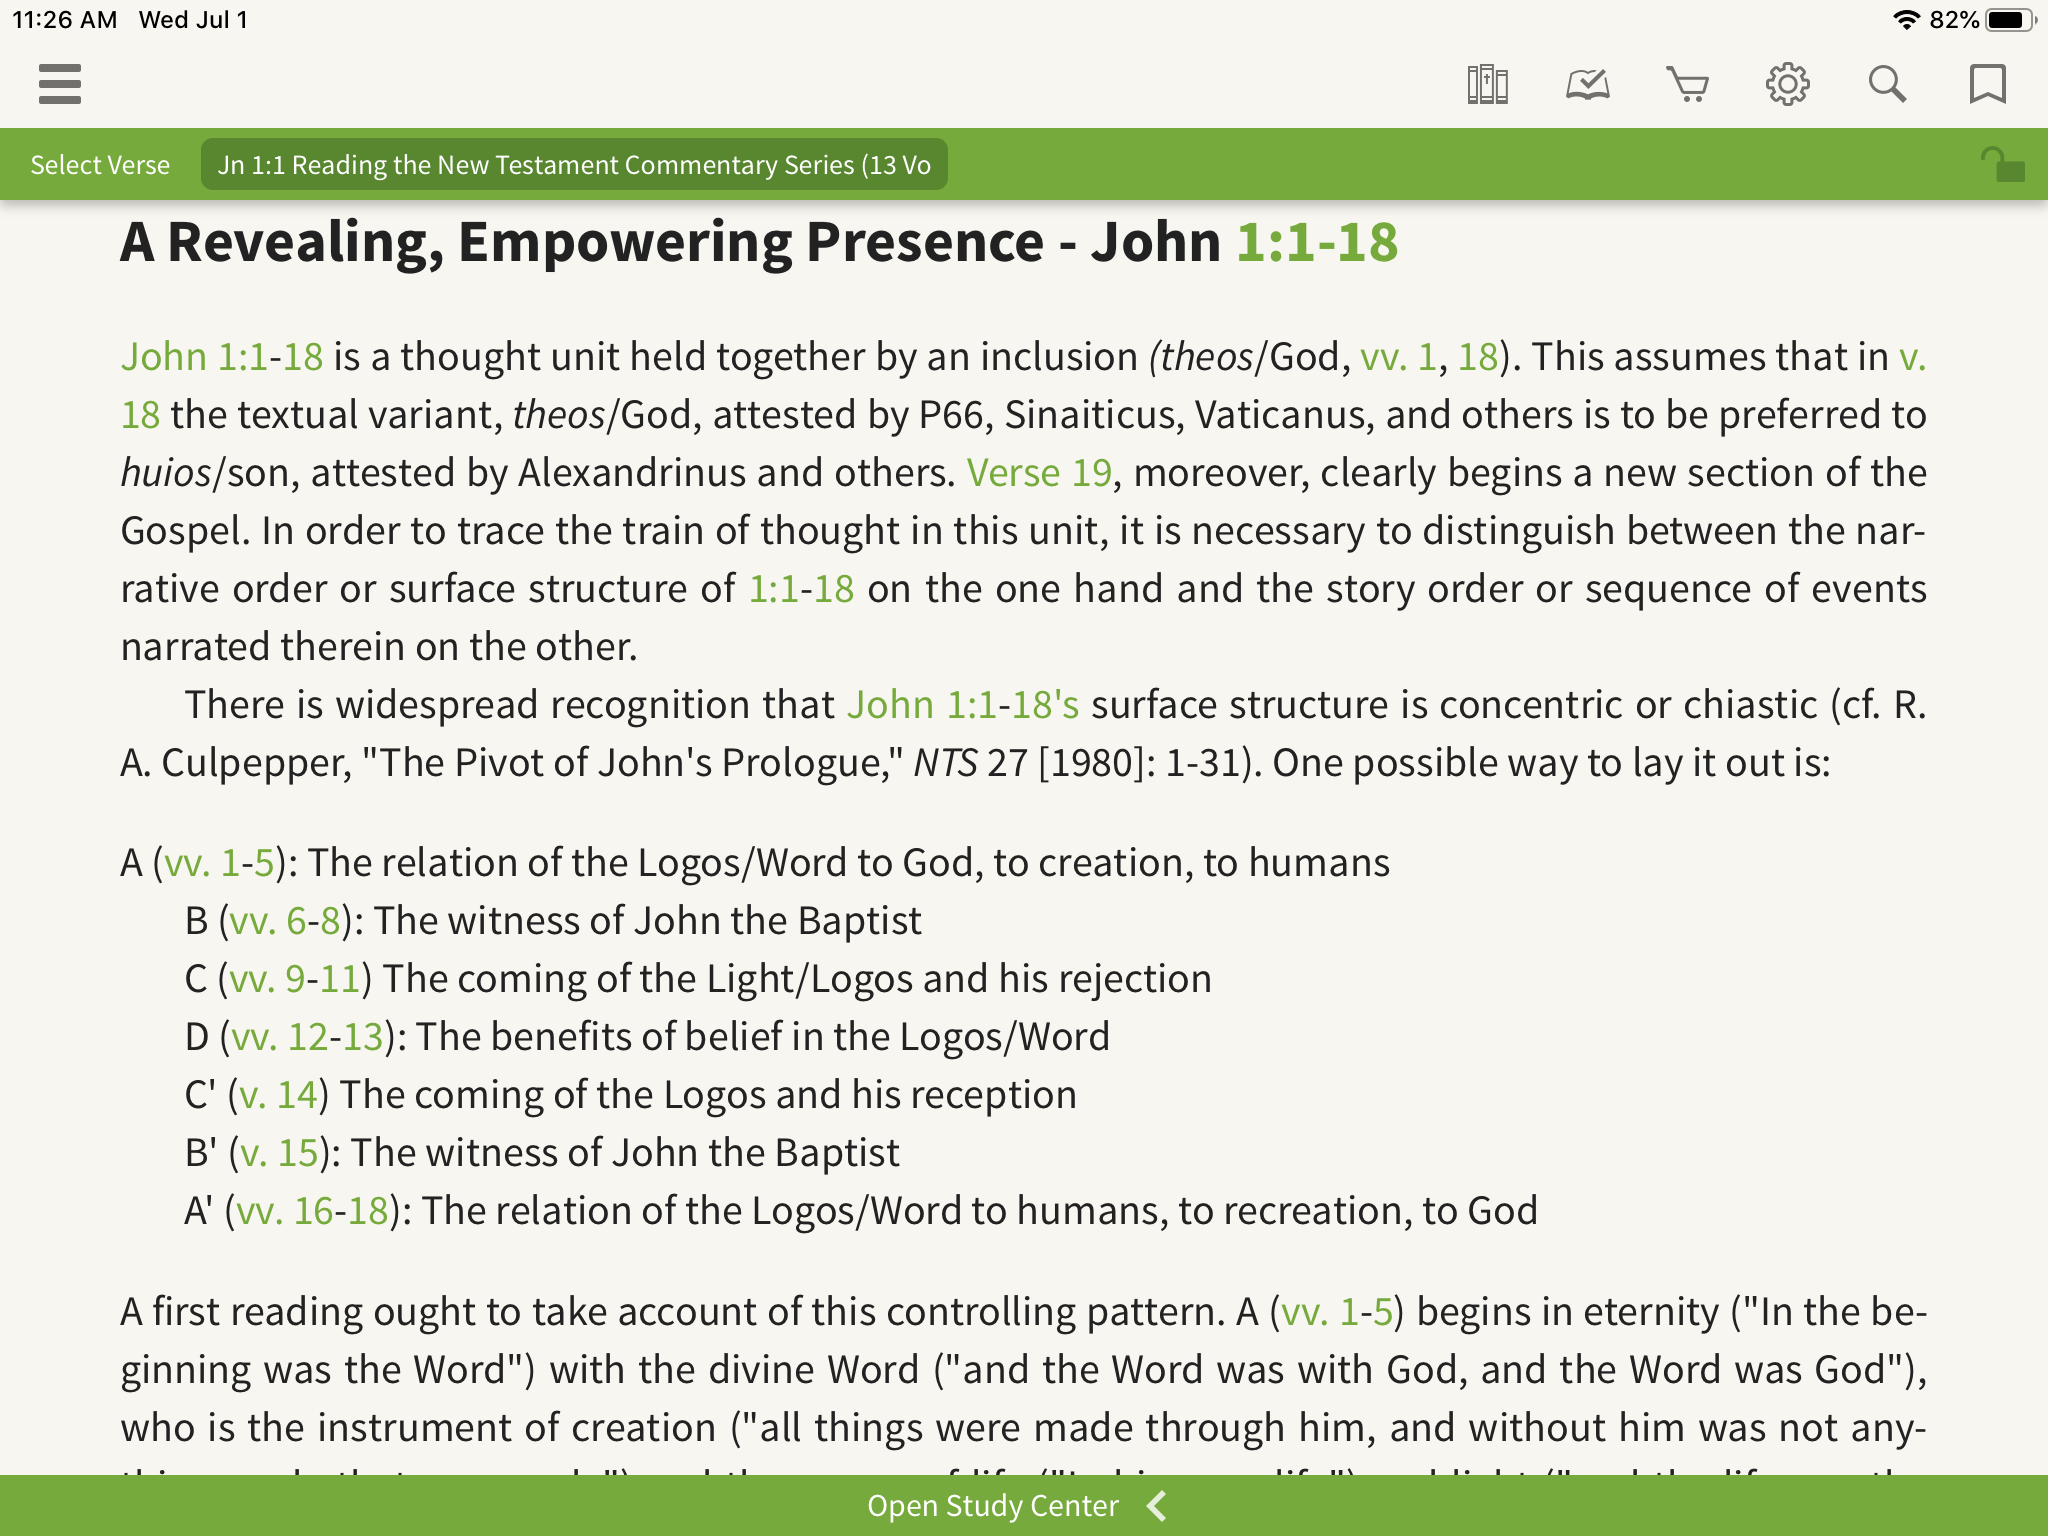 Reading the New Testament: John in the Olive Tree Bible App commentary